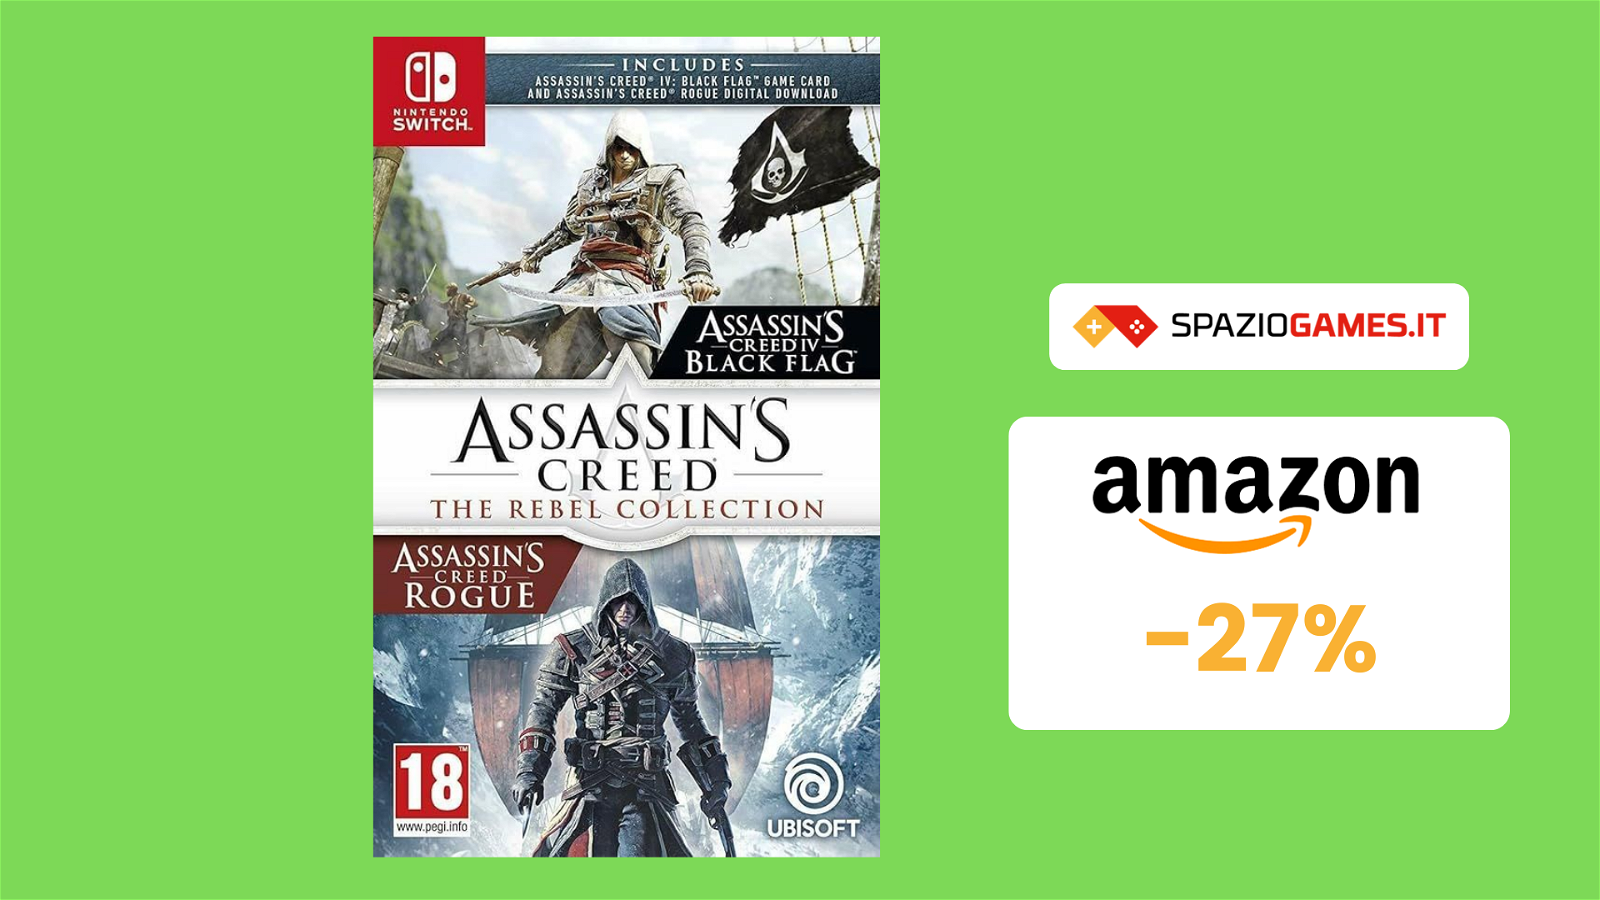 Assassin's Creed The Rebel Collection per Switch a soli 25€!